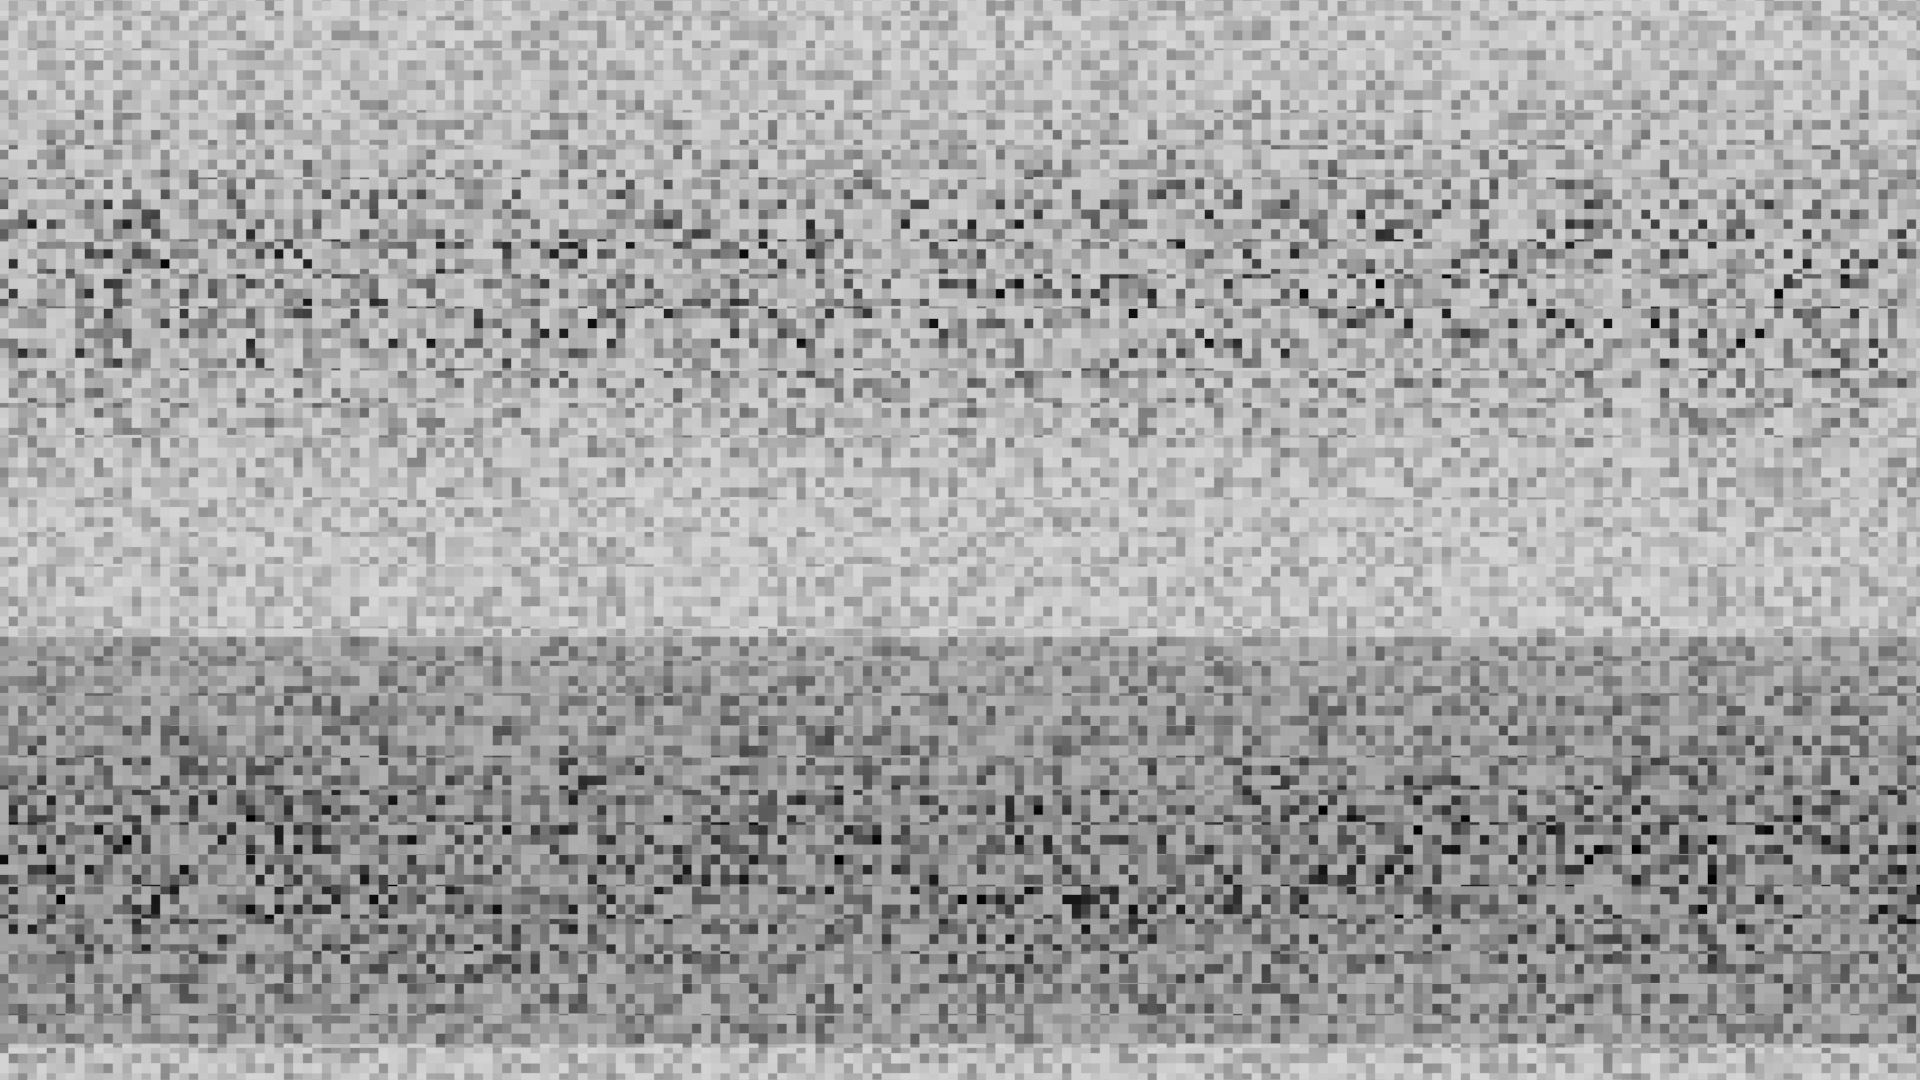 TV static noise effect preview image 2